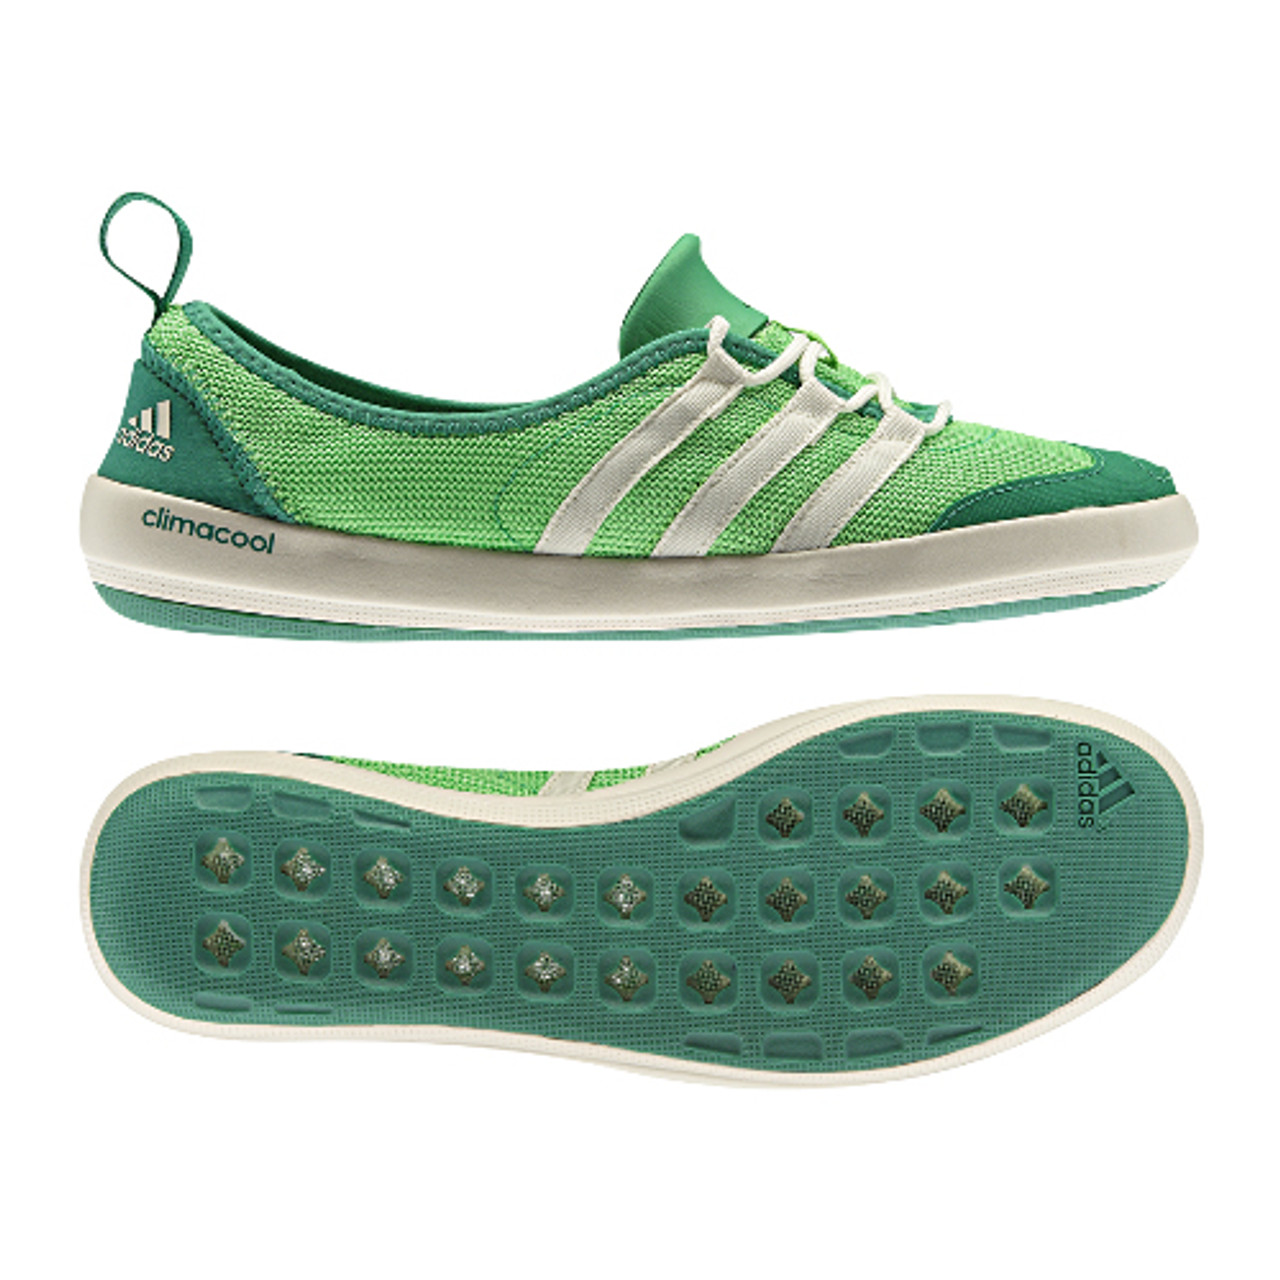 Adidas Climacool Boat Green Ladies Outdoor Shoes - | Discount Ladies Athletic Shoe More - | Shoolu.com